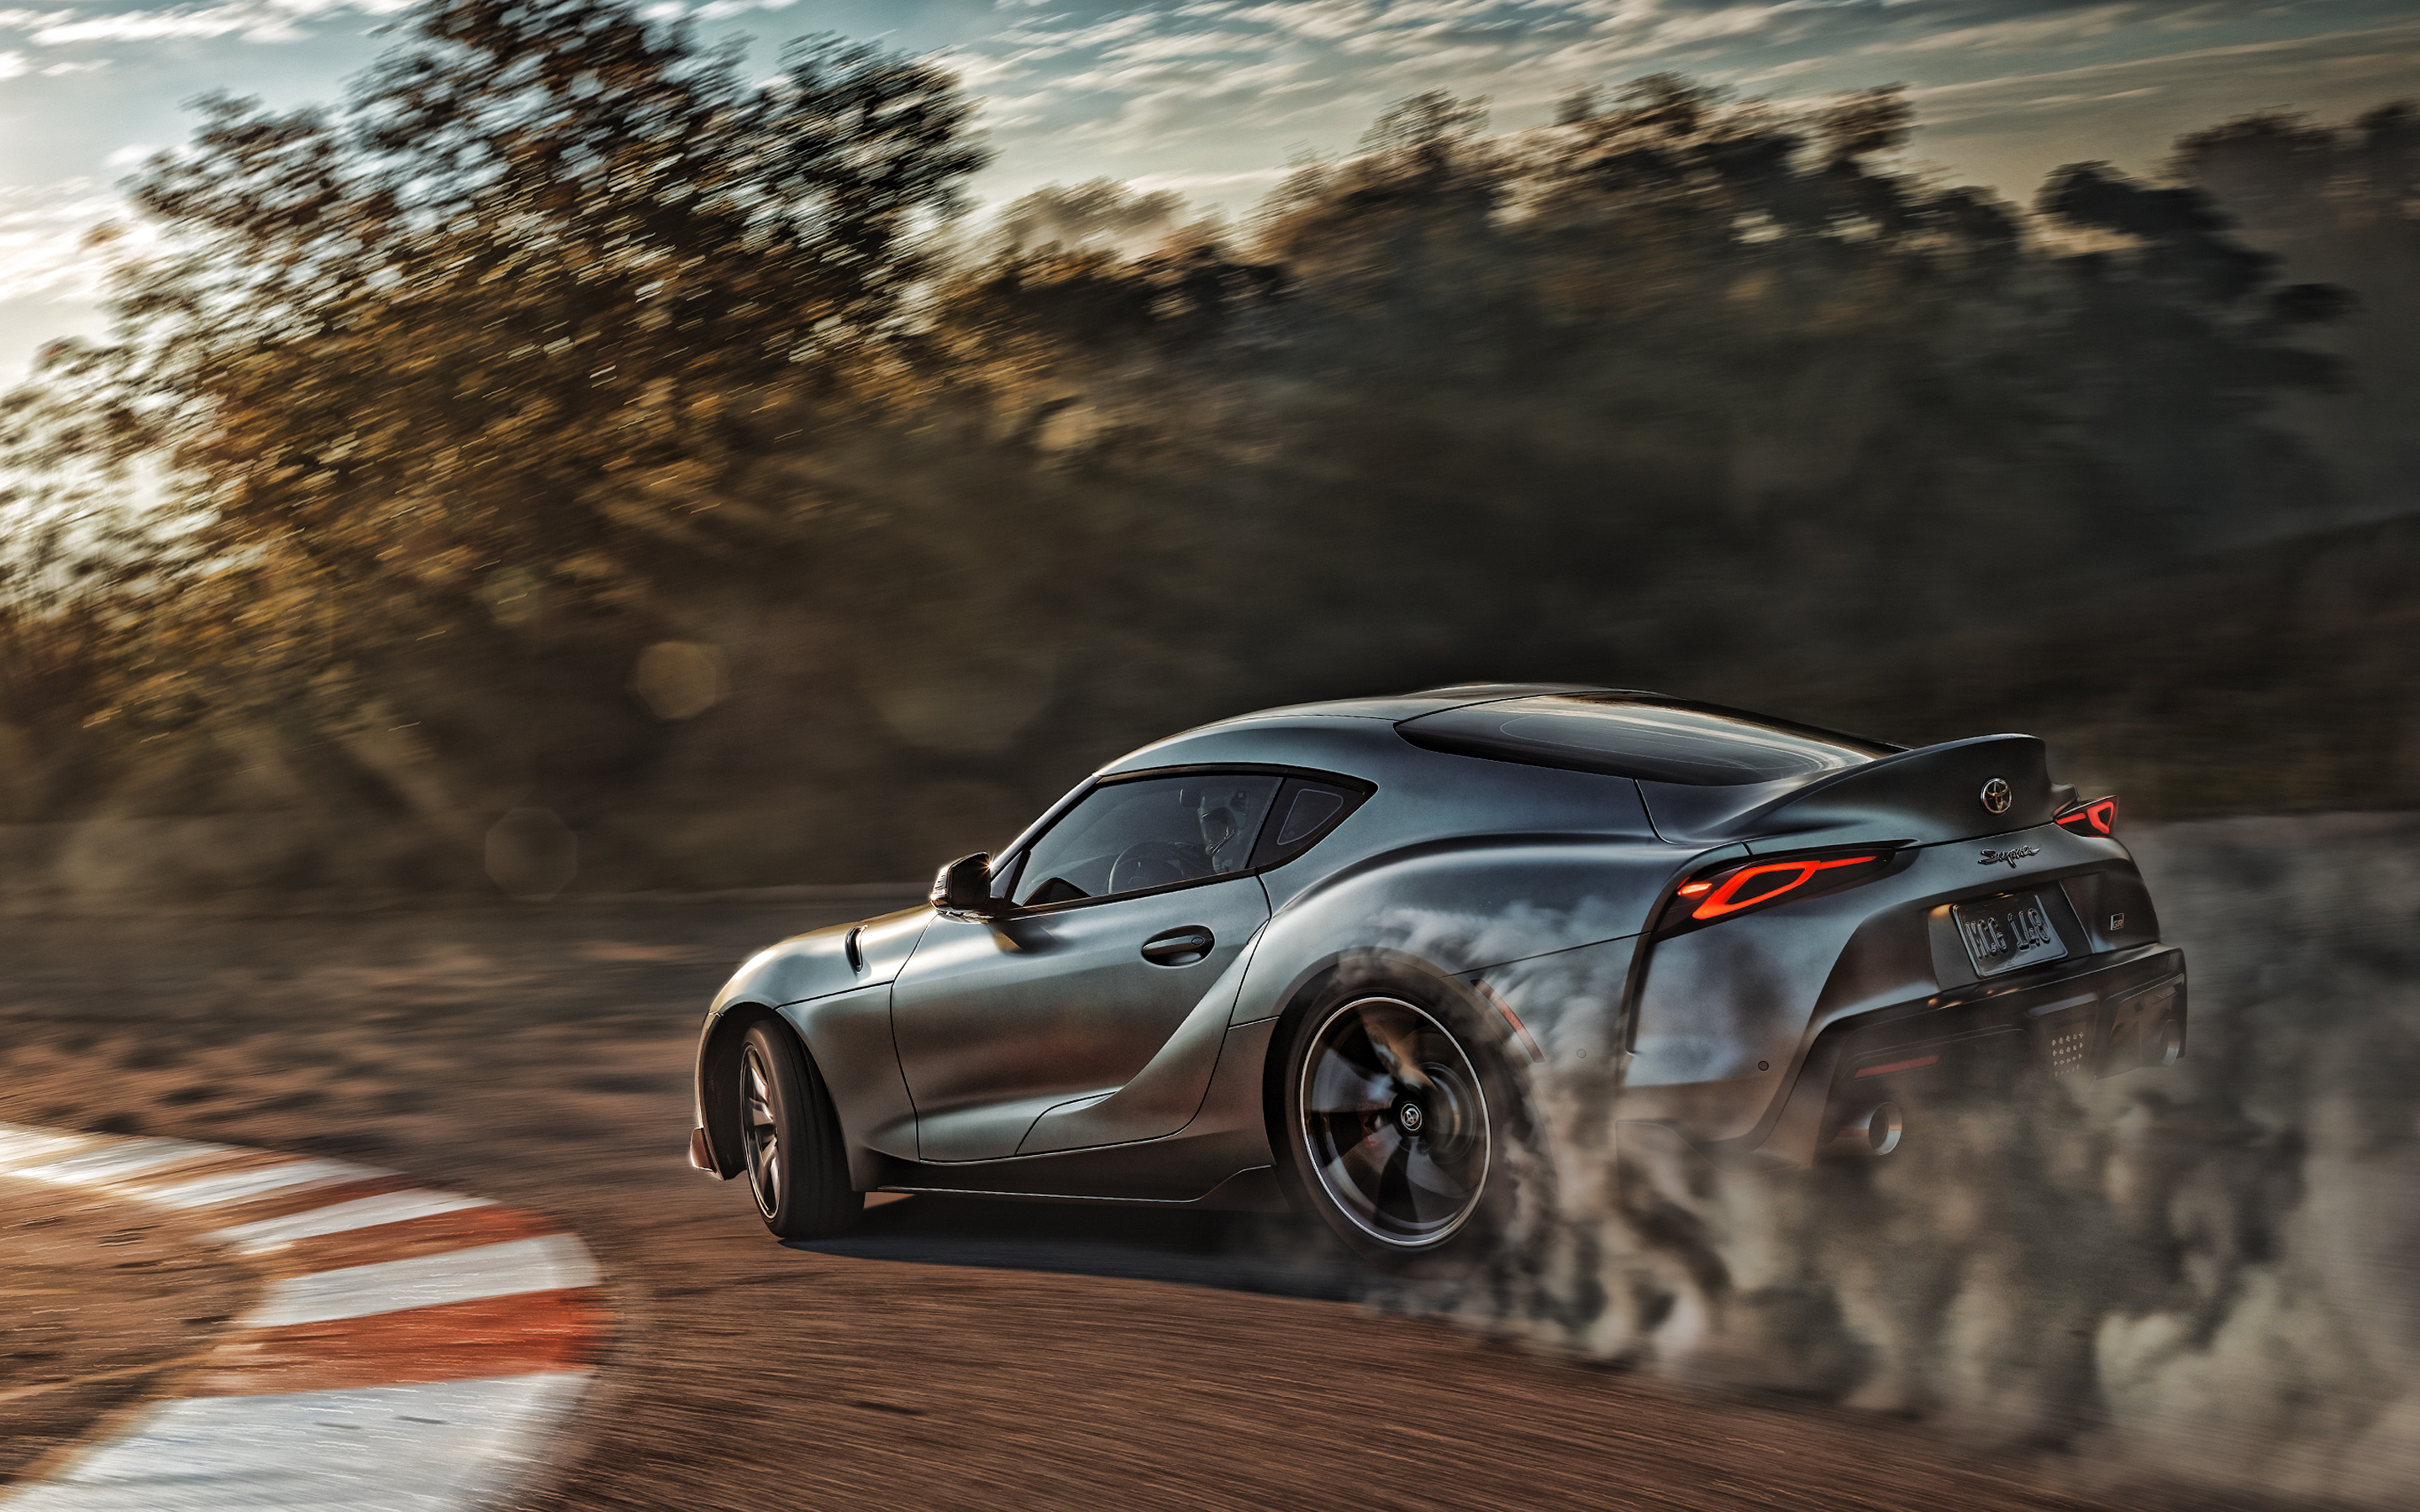 Download wallpaper Toyota Supra, drift, sports coupe, rear view, racing track, new gray Supra, japanese sports cars, Toyota for desktop with resolution 2880x1800. High Quality HD picture wallpaper